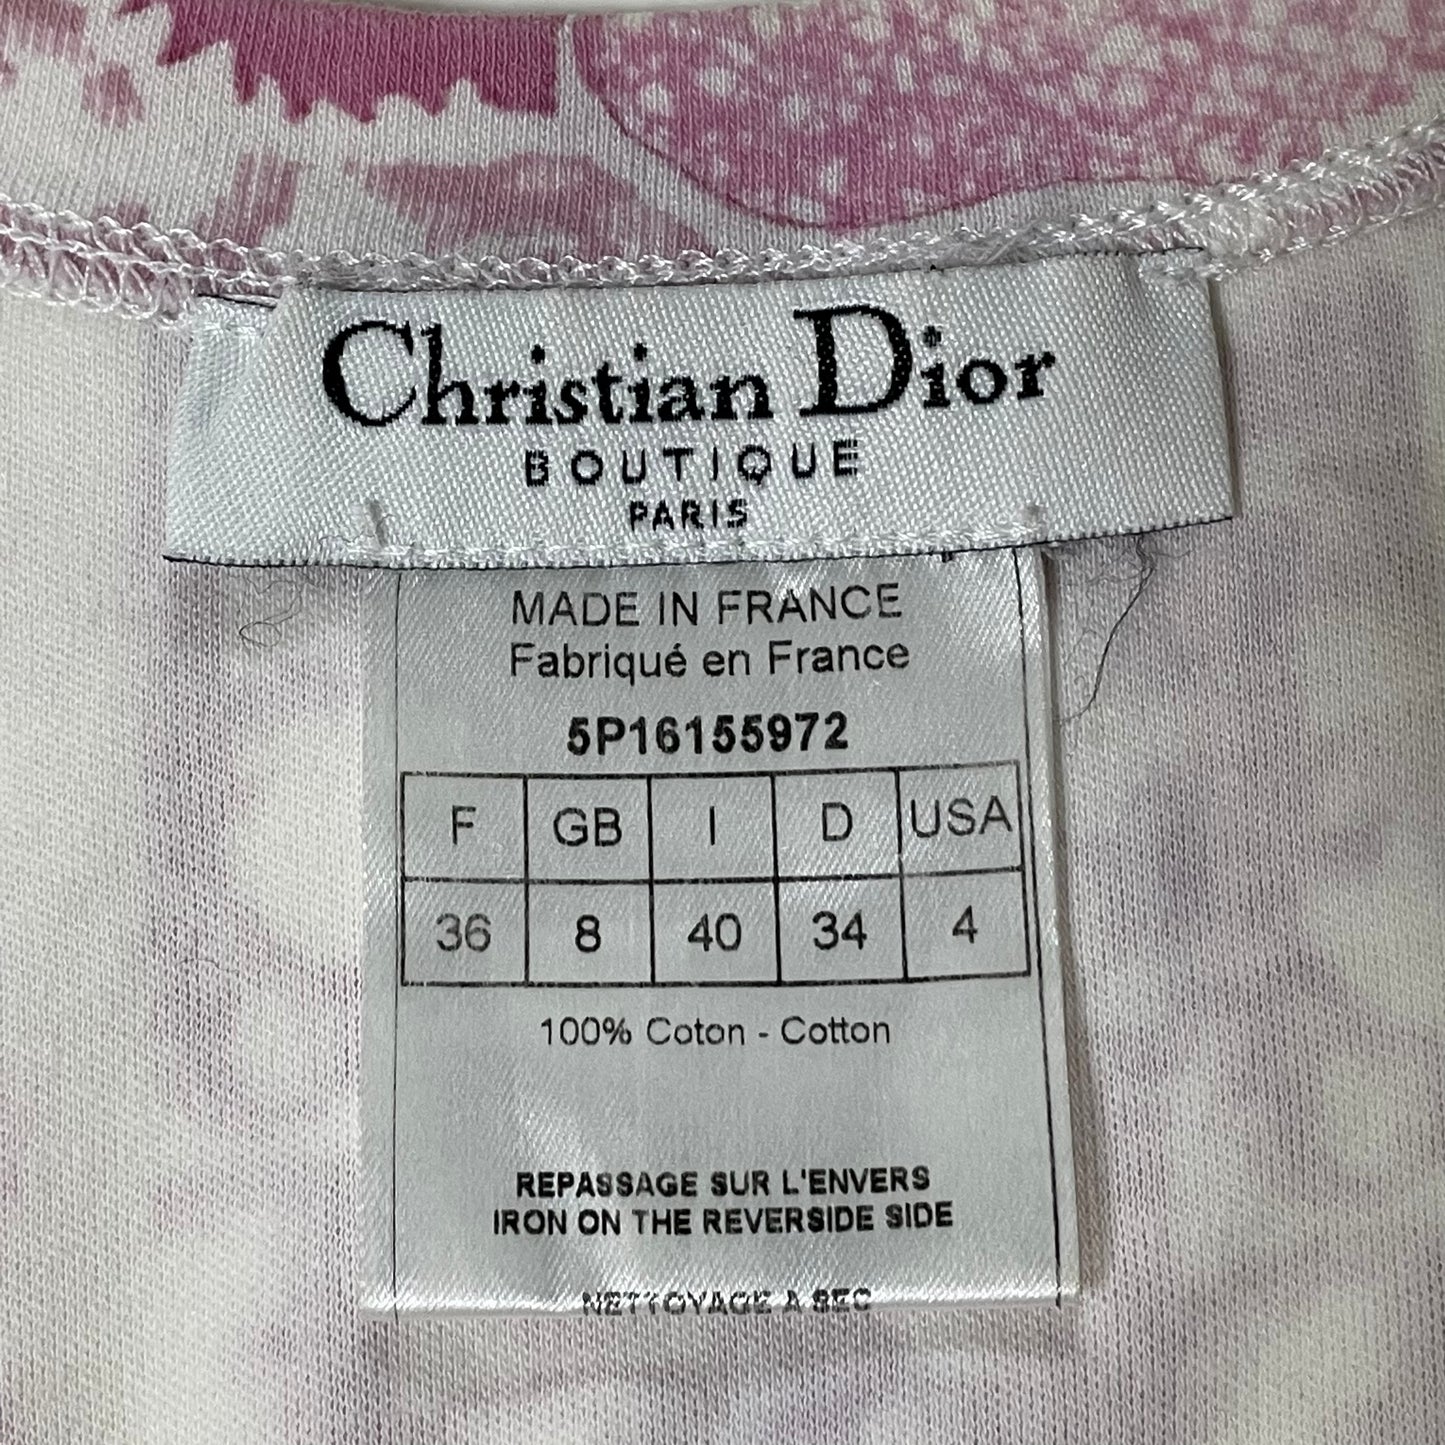 CHRISTIAN DIOR Trotter Floral Print Tank Top